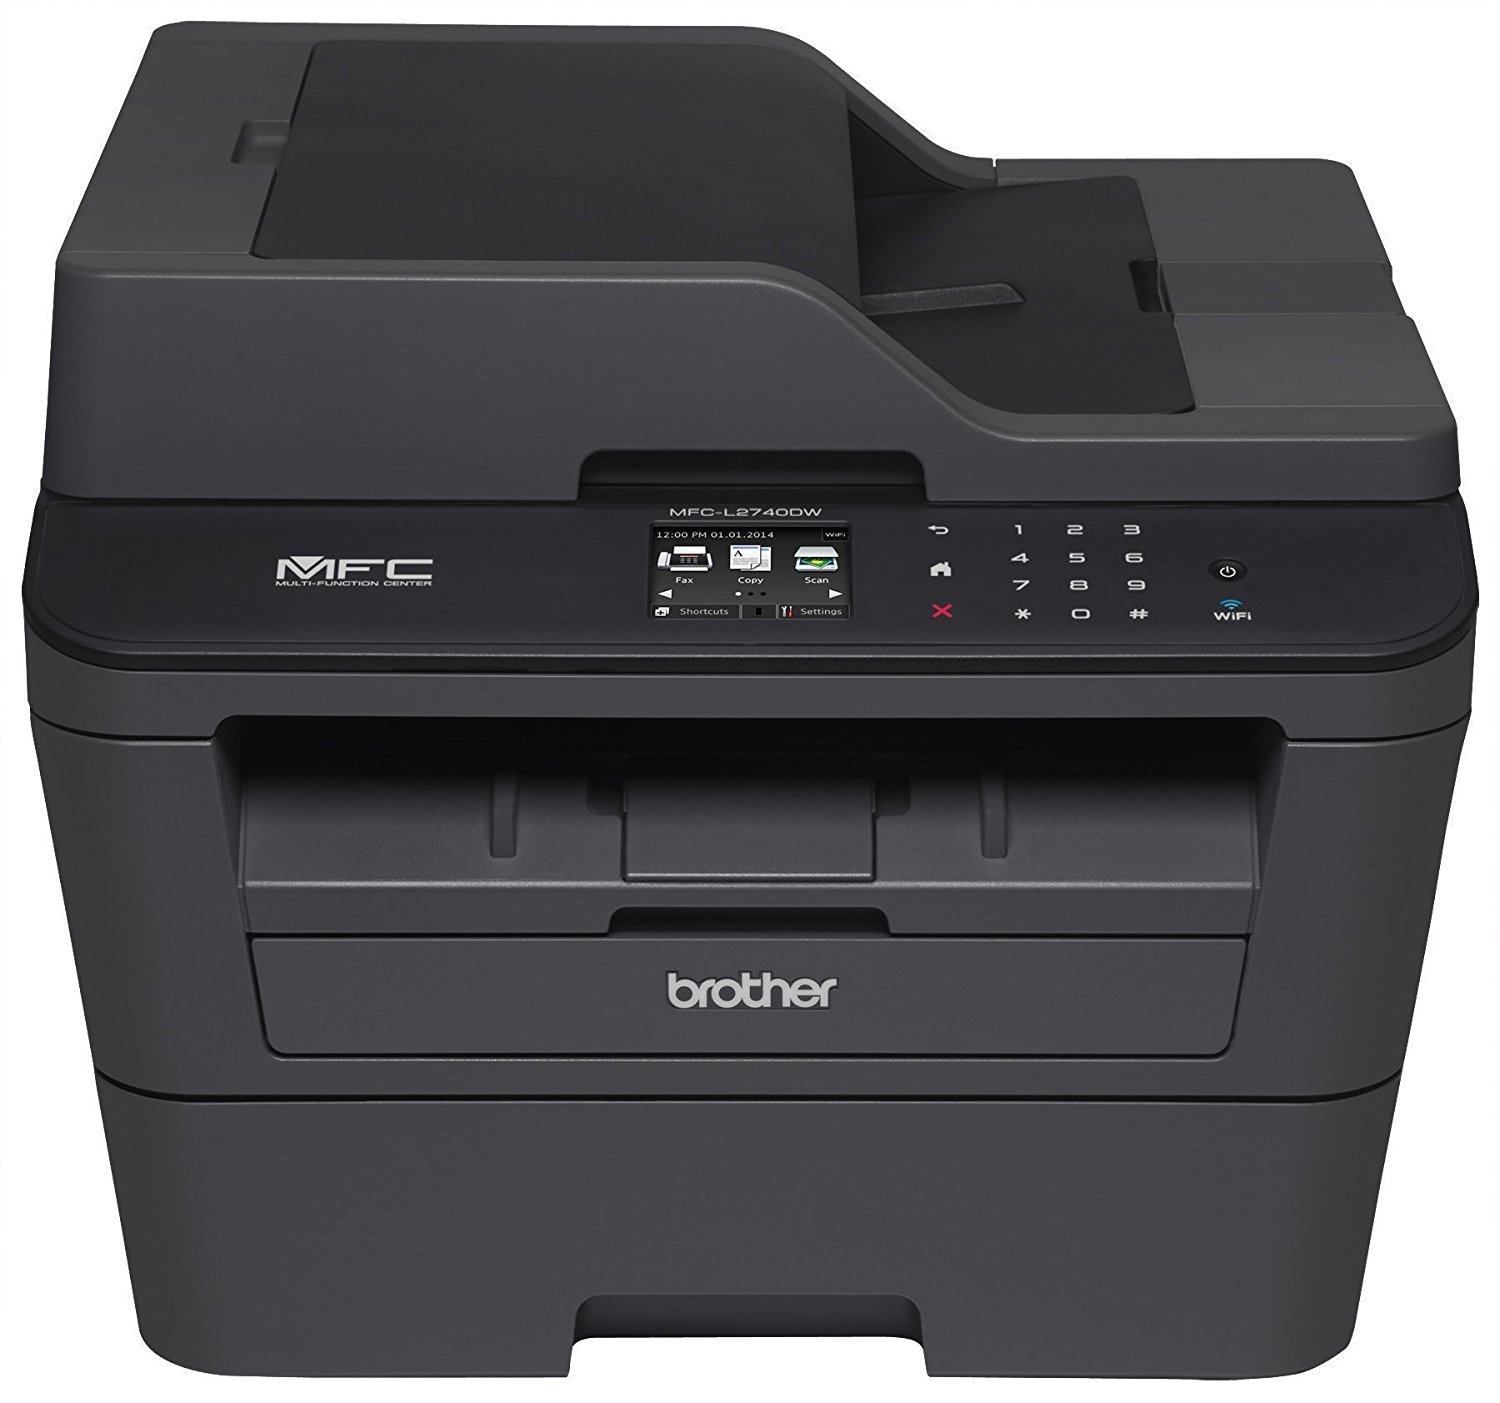 5. Brother MFCL2740DW Wireless Printer